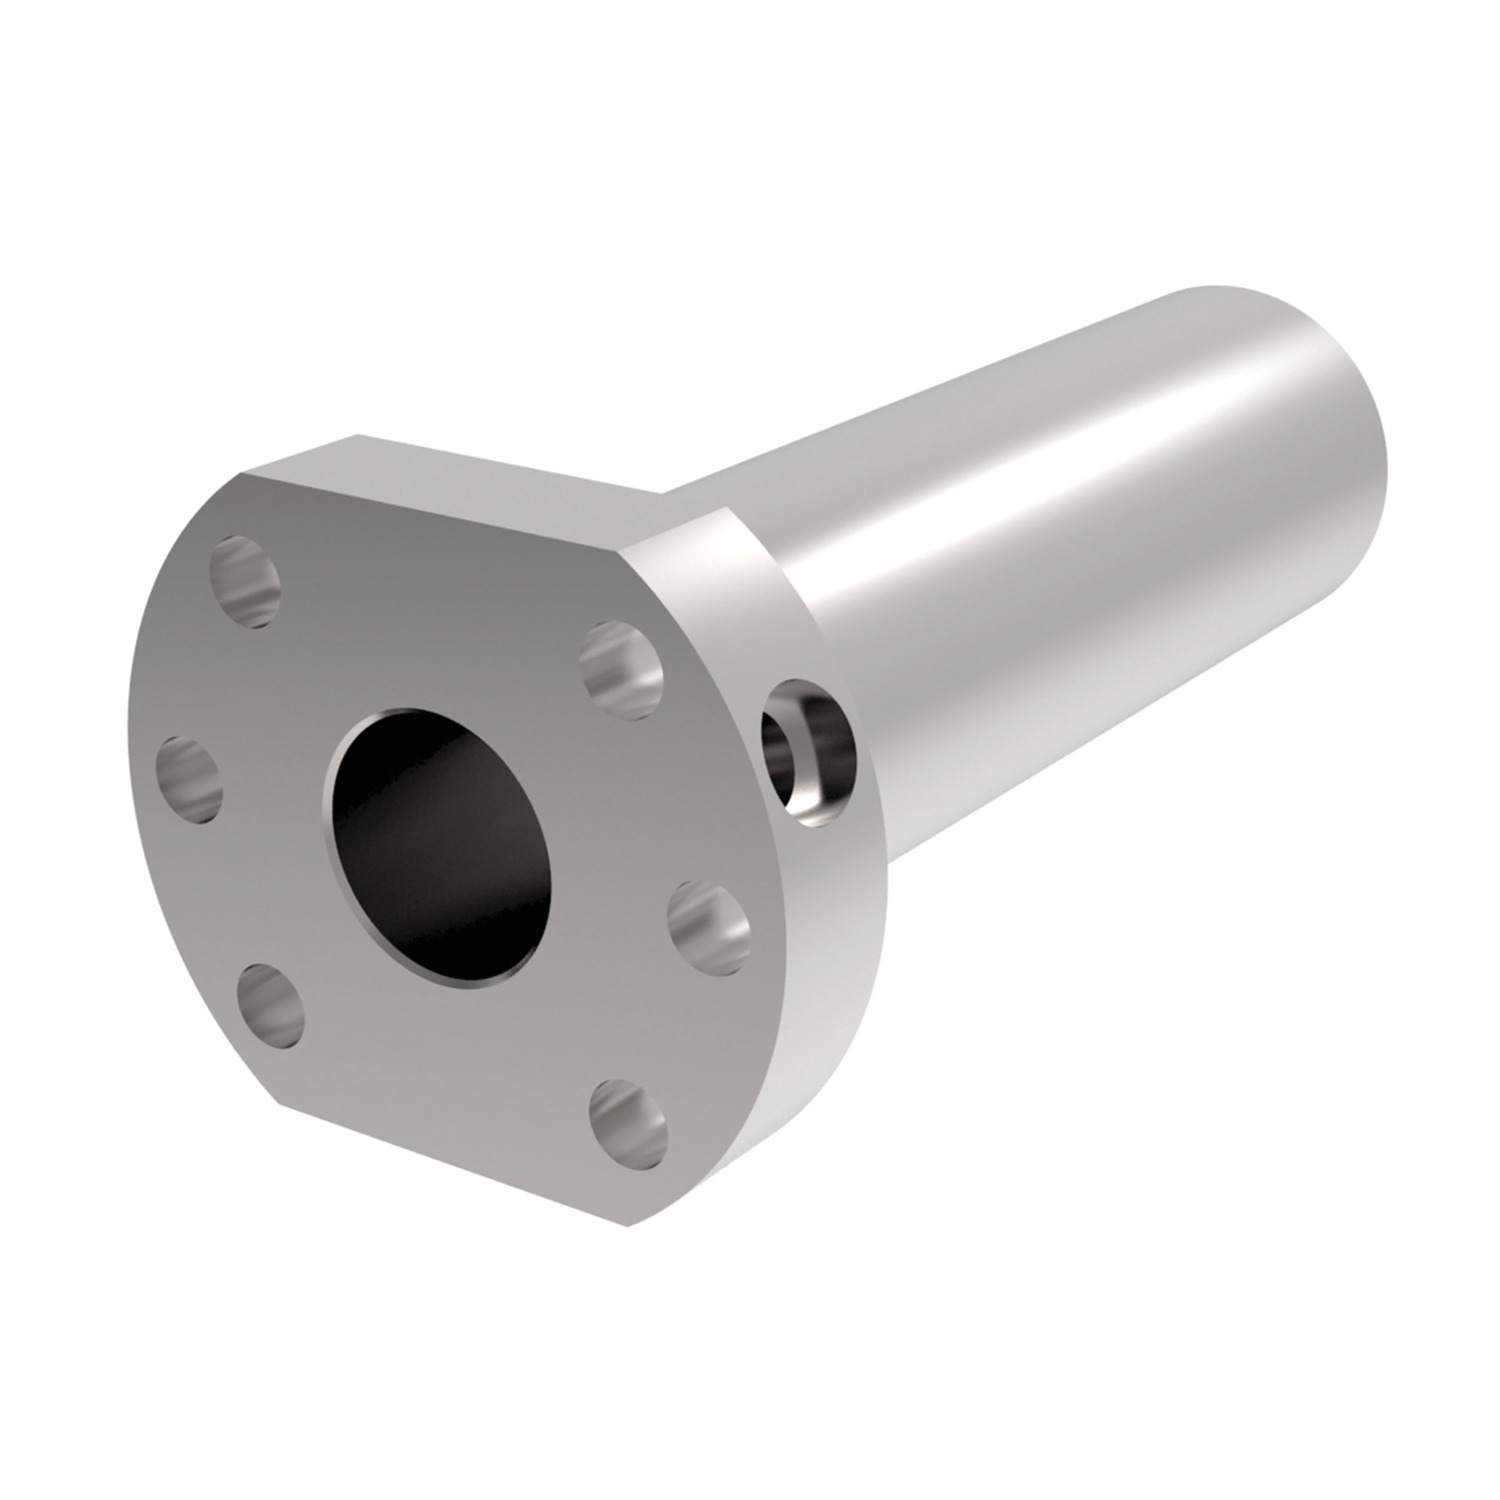 L1371 - Flanged Double Ball Nuts